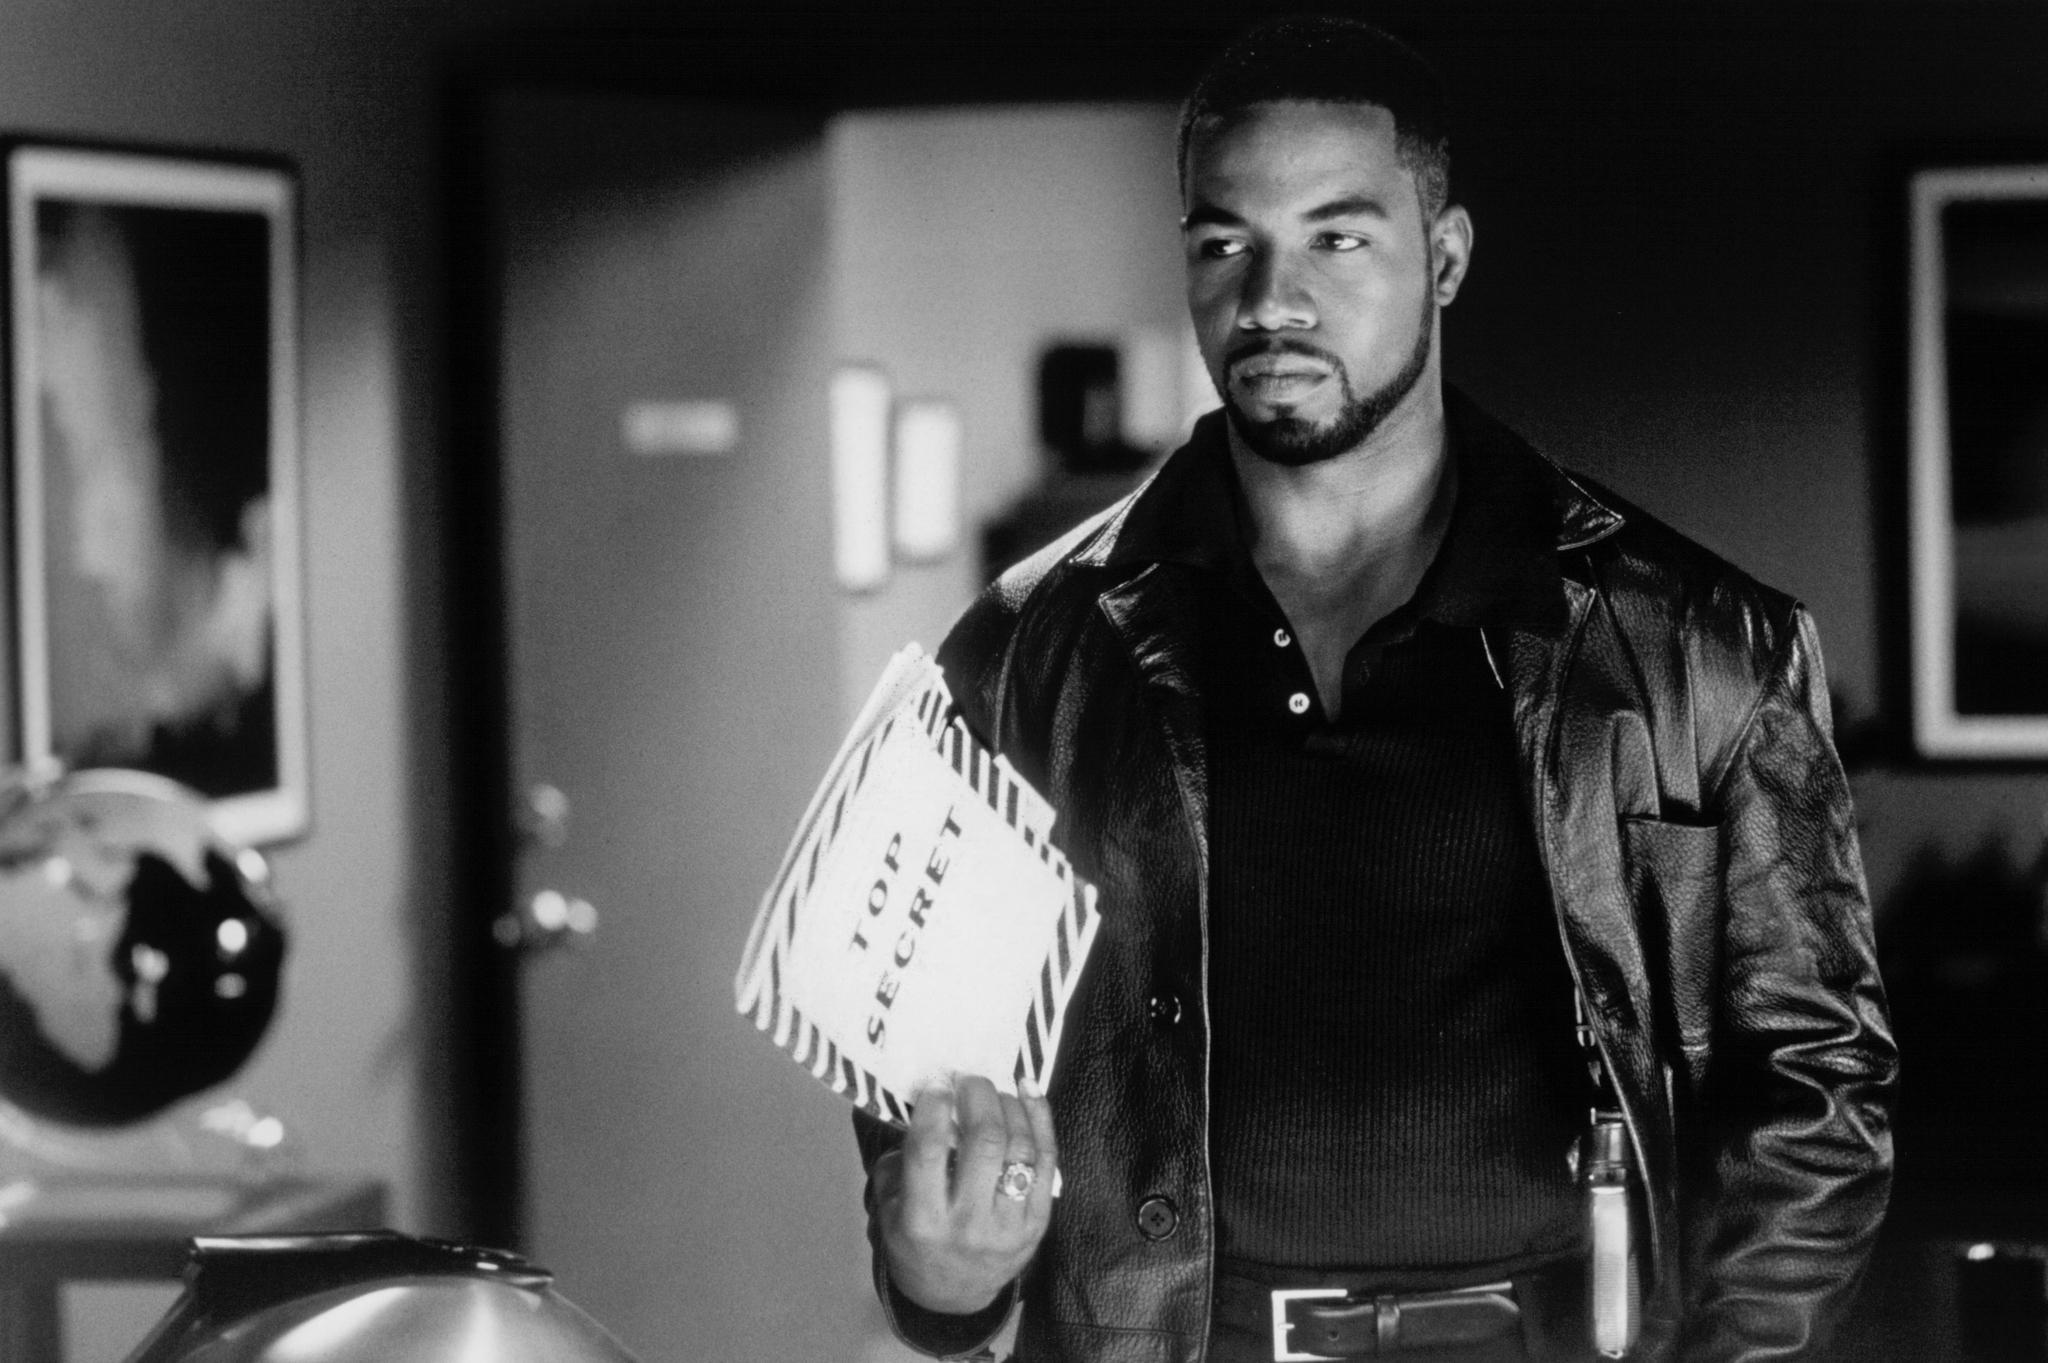 Beloved Actor Michael Jai White wallpapers and images